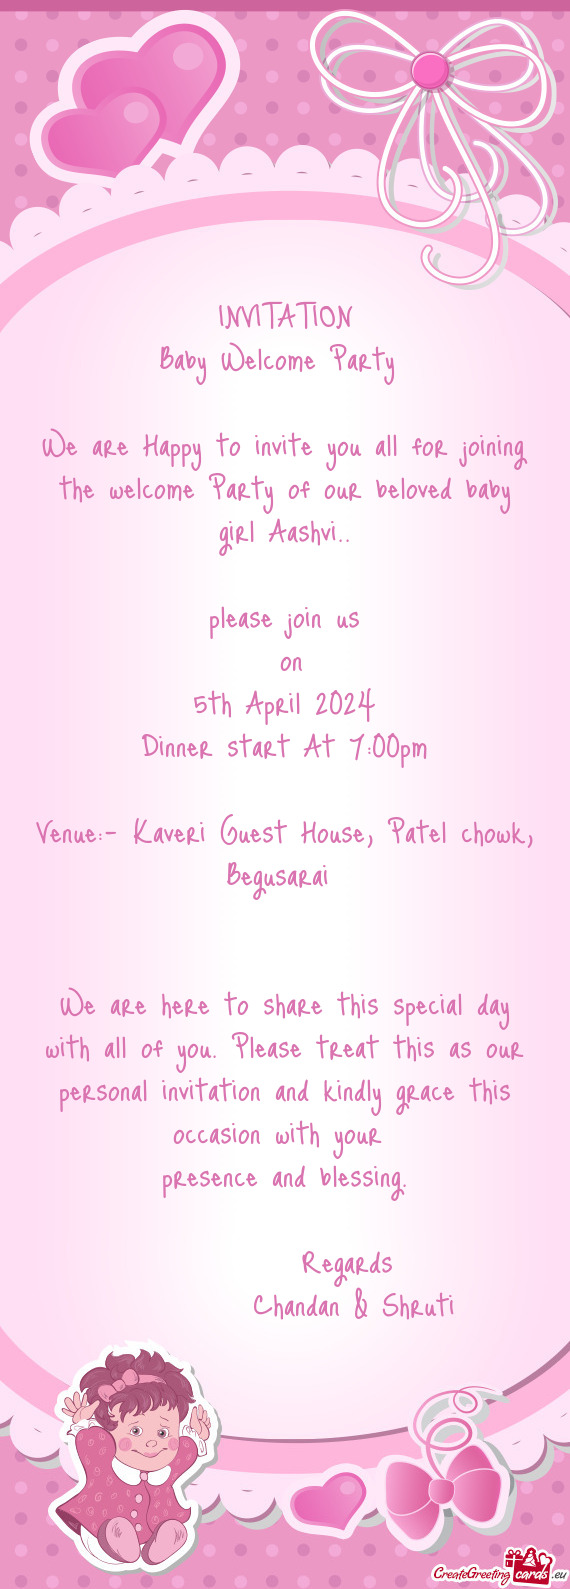 We are Happy to invite you all for joining the welcome Party of our beloved baby girl Aashvi